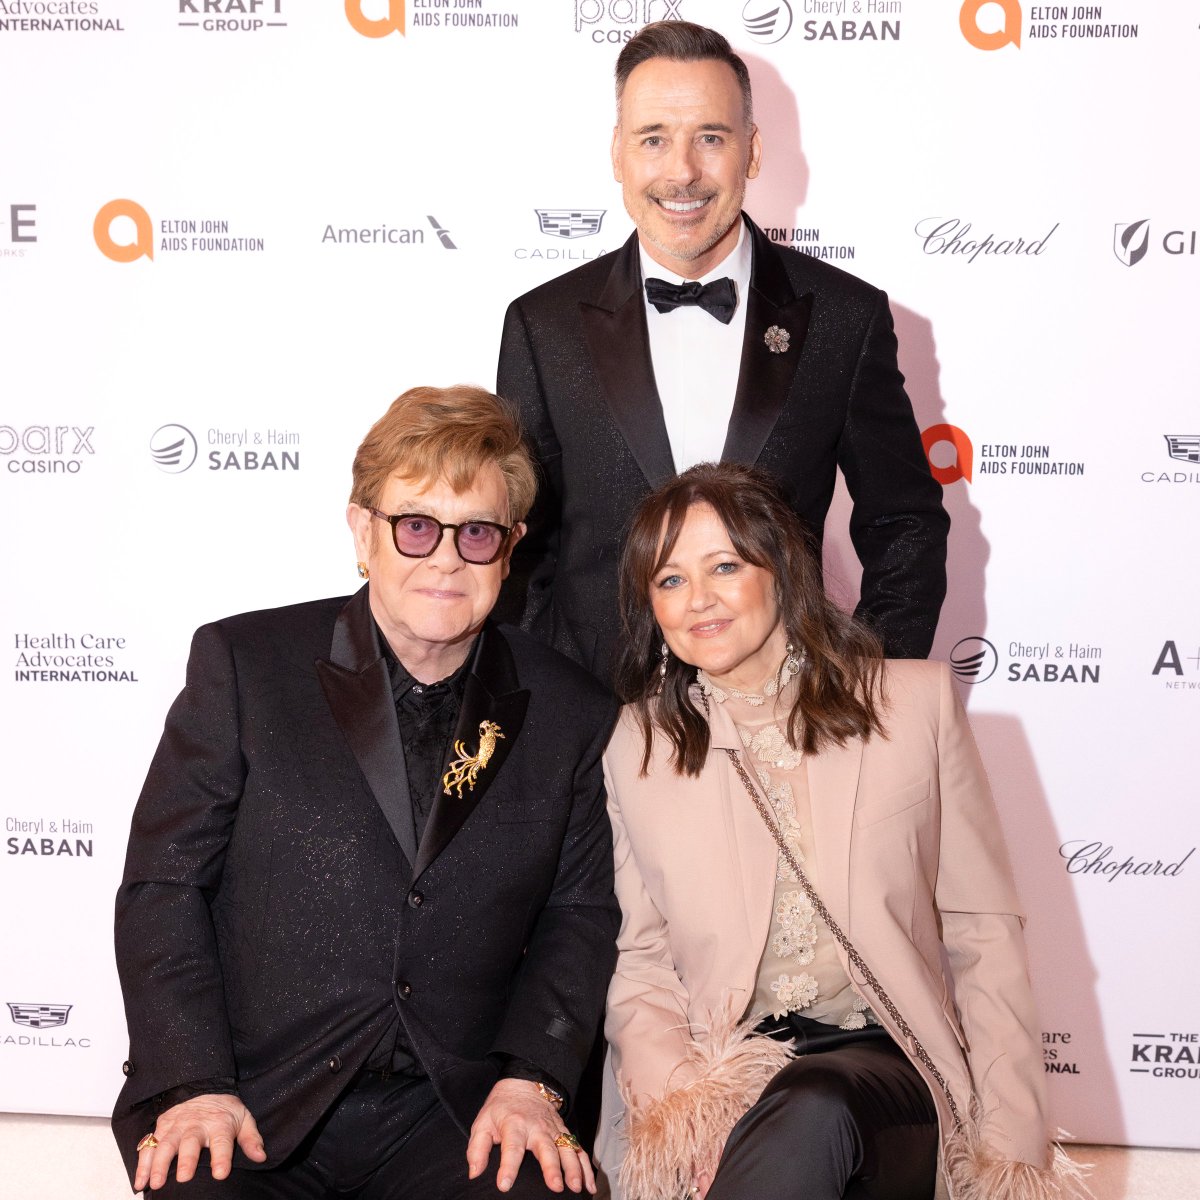 Happy birthday #EltonJohn 🌟 Your passion, talent, and unwavering dedication continues to inspire us all. Here's to another year of making a profound difference by spreading love and compassion!